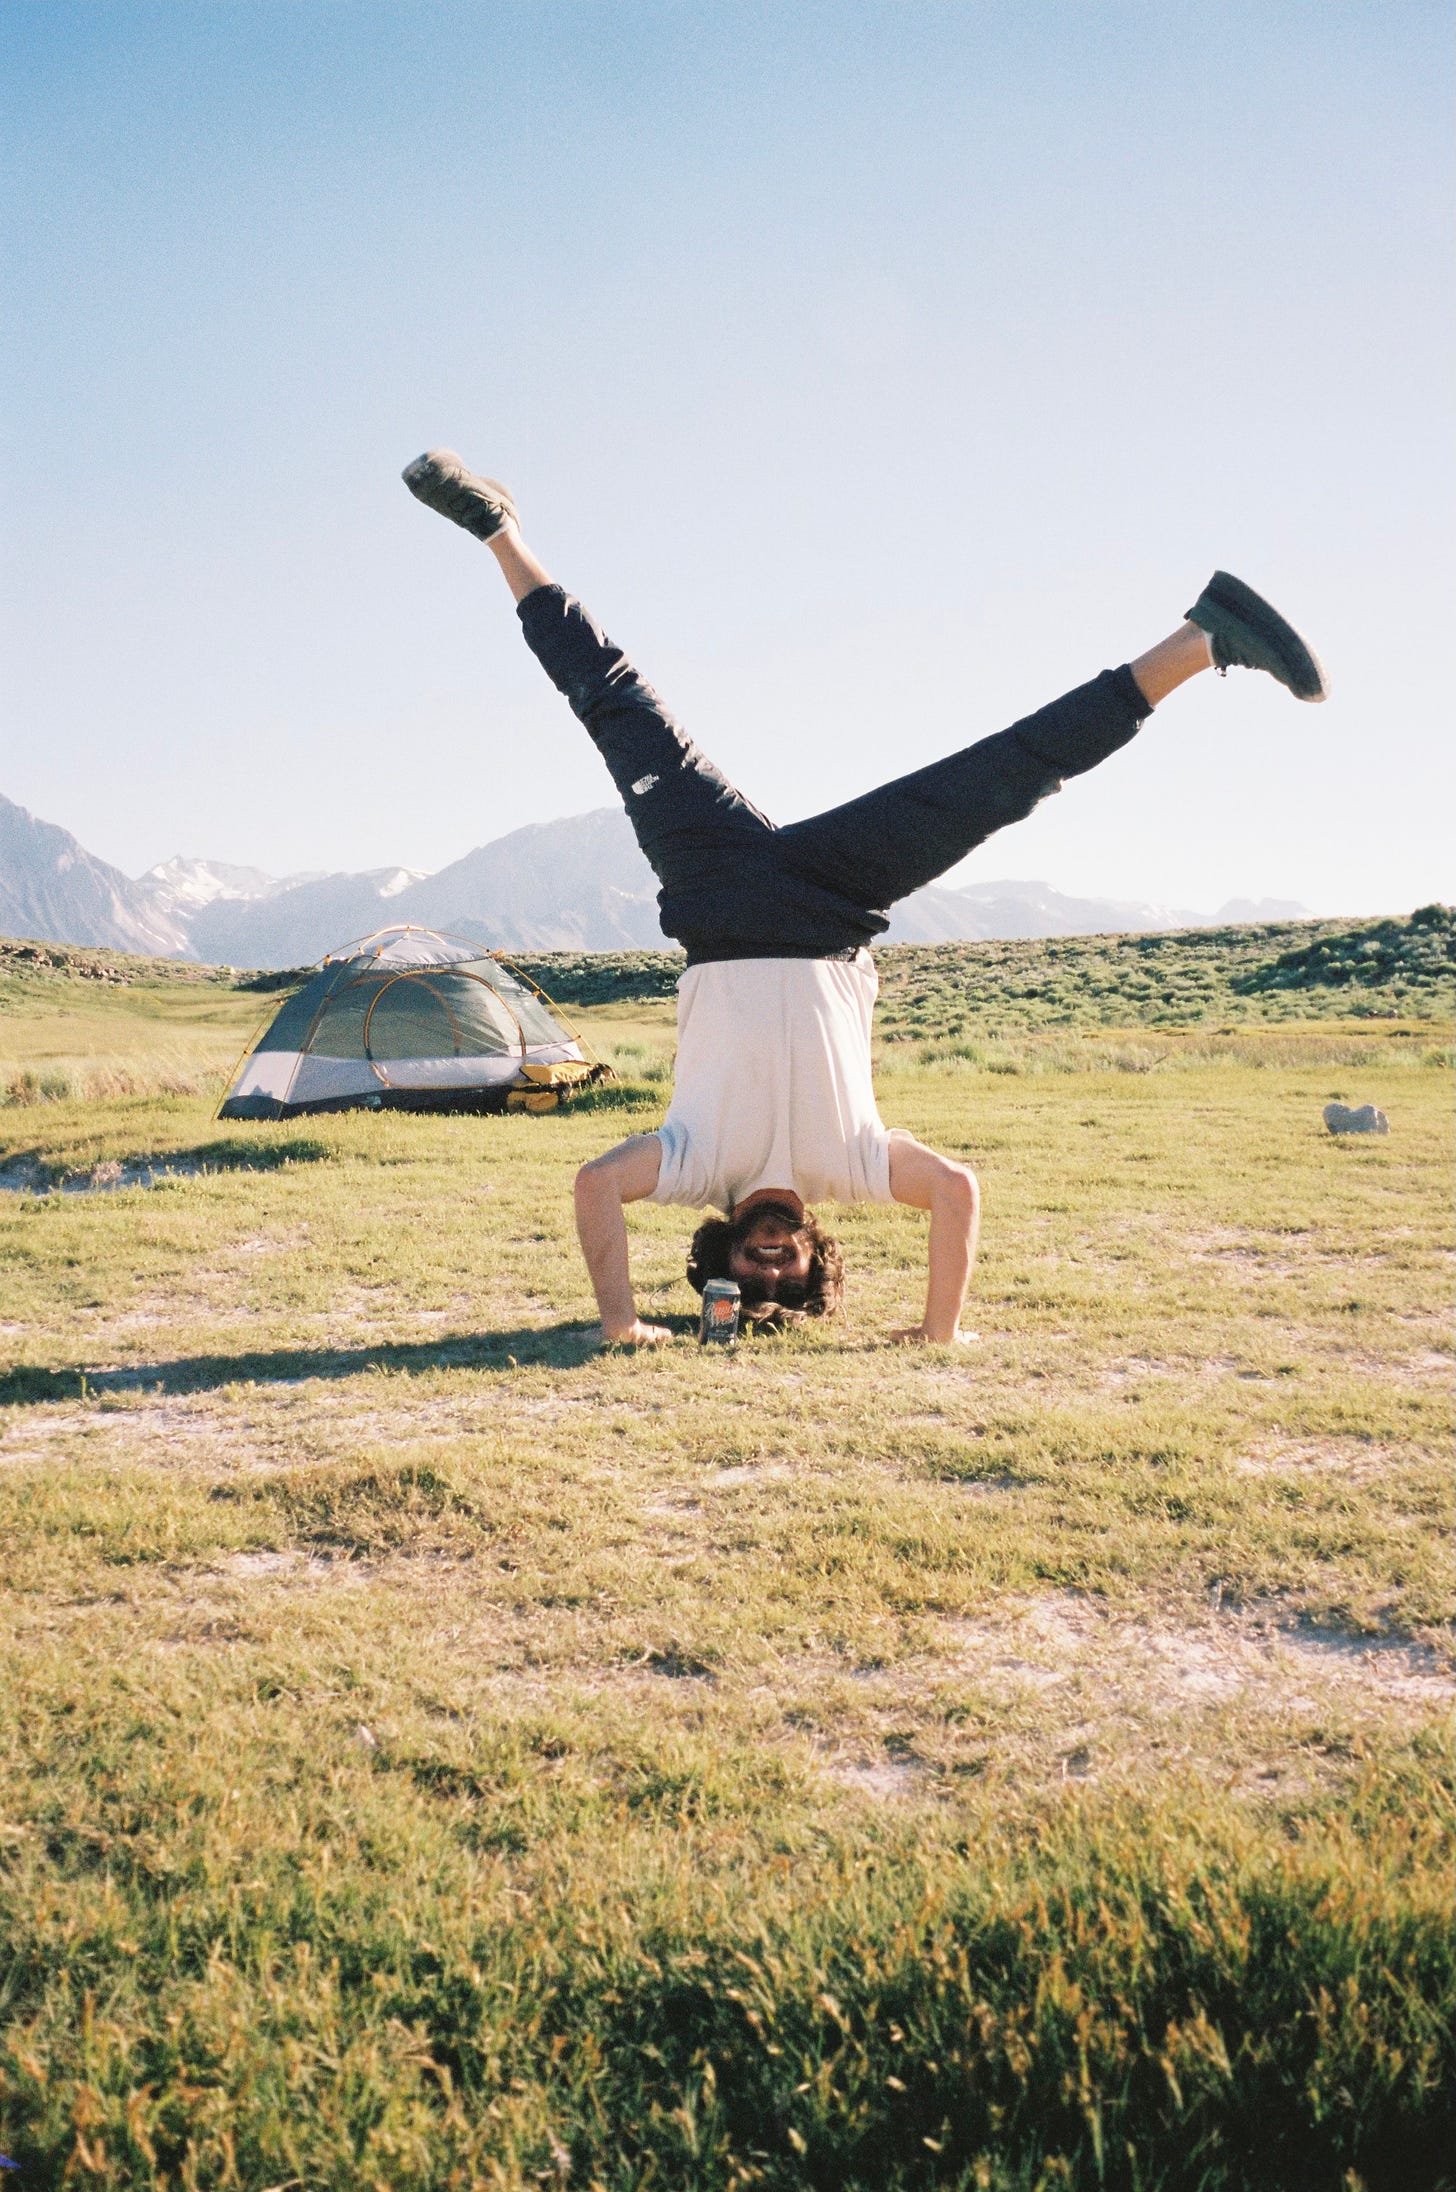 A man doing a headstand on a grassy hillside with a tent and mountains in the background.